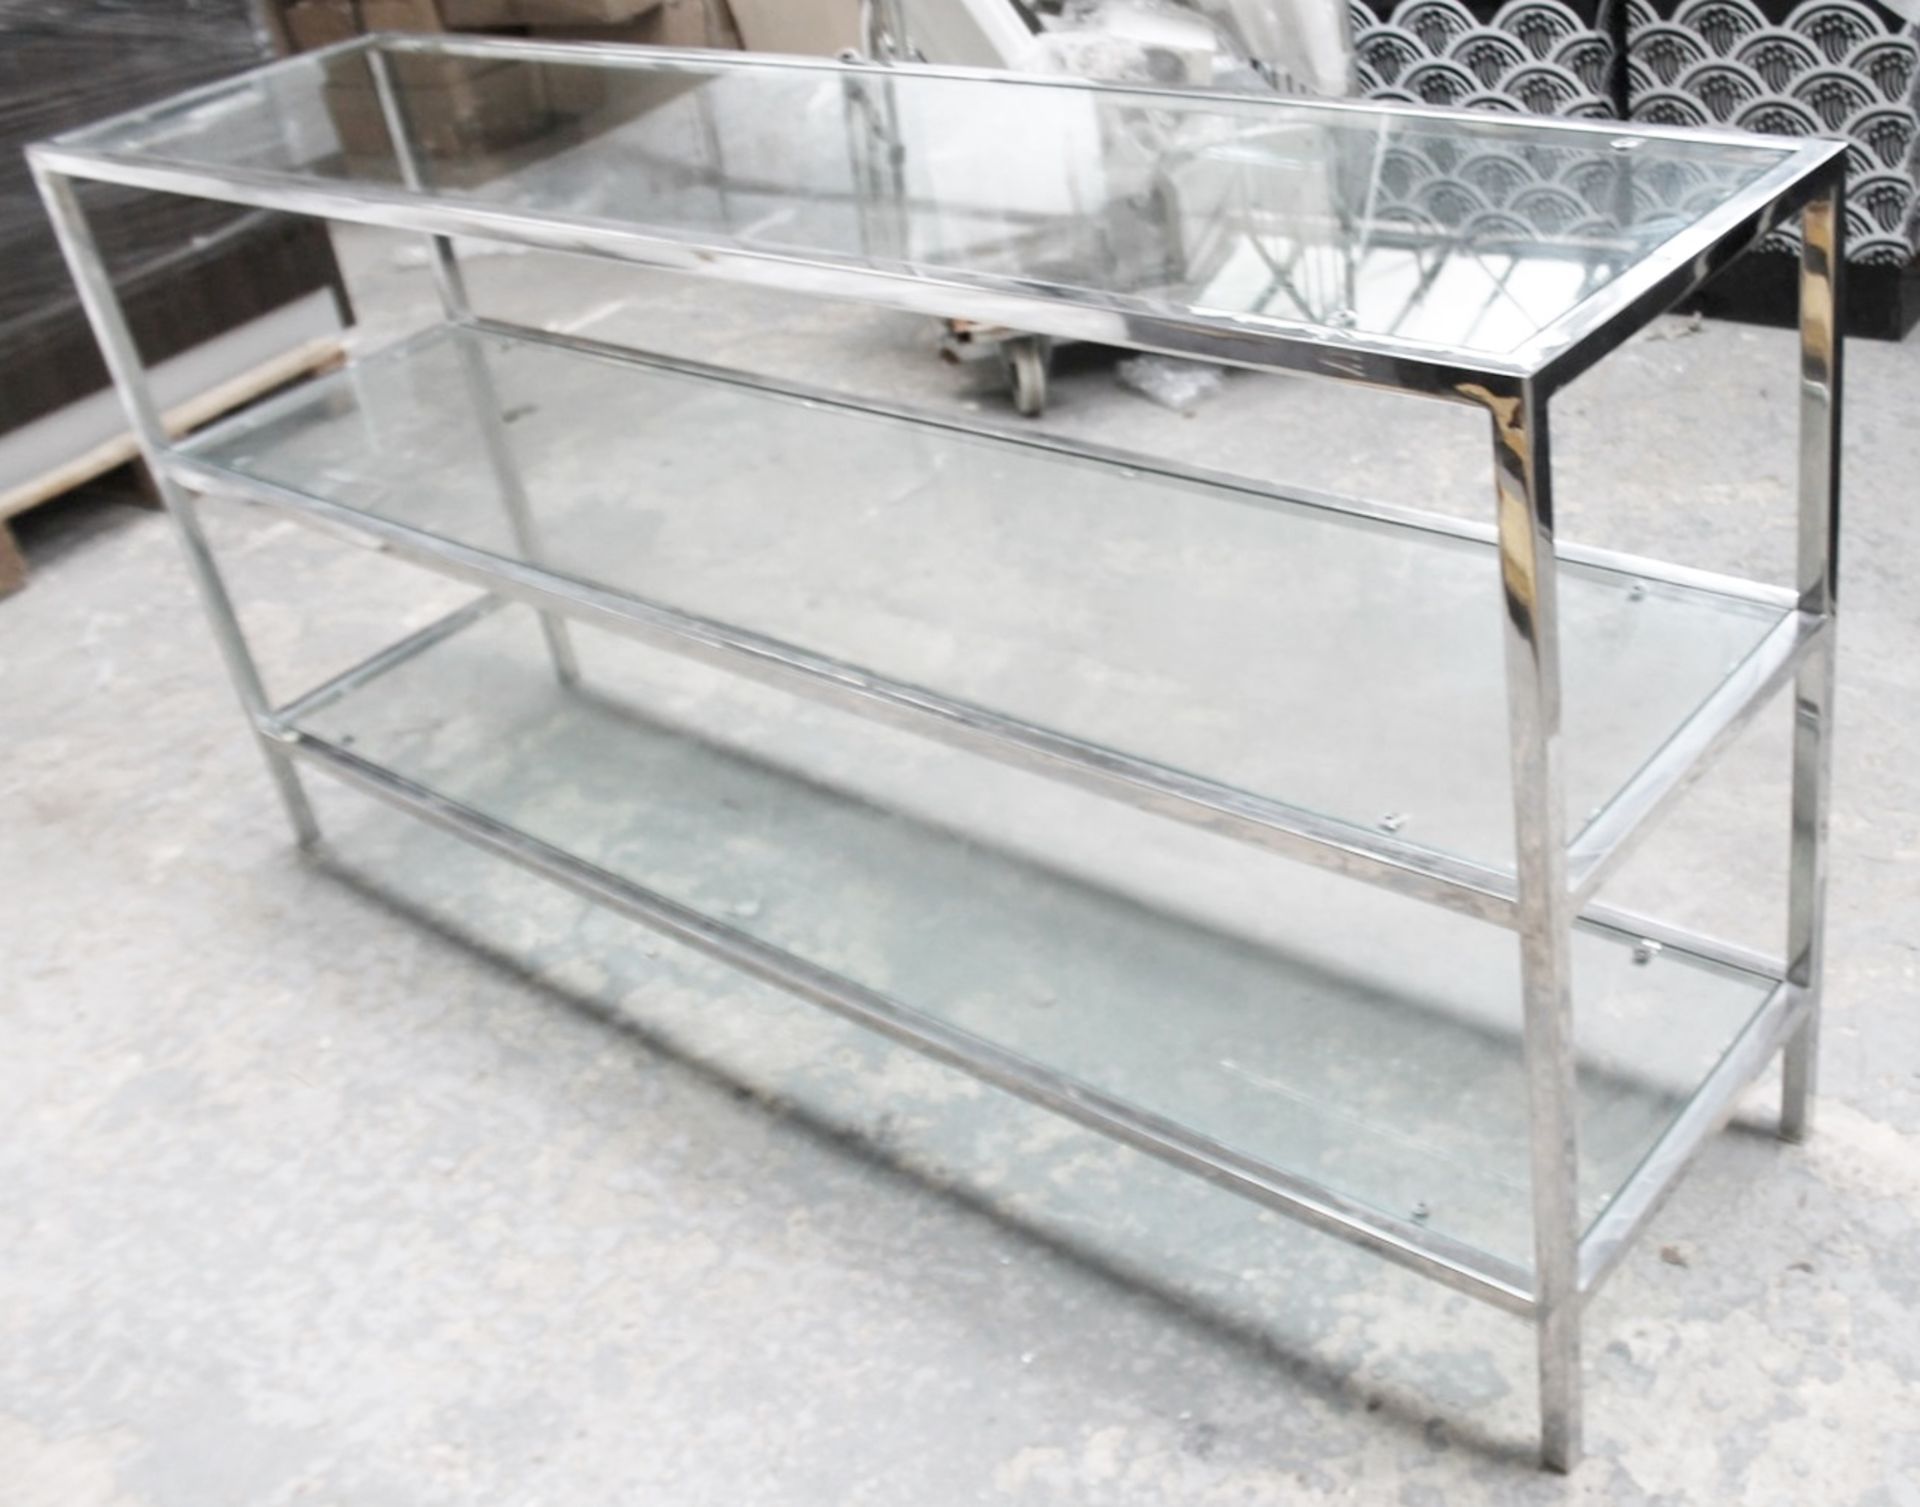 1 x 3-Tier Rectangular Metal Shop Display Unit With Glass Shelves In Chrome - Ex-Display Showroom - Image 2 of 2